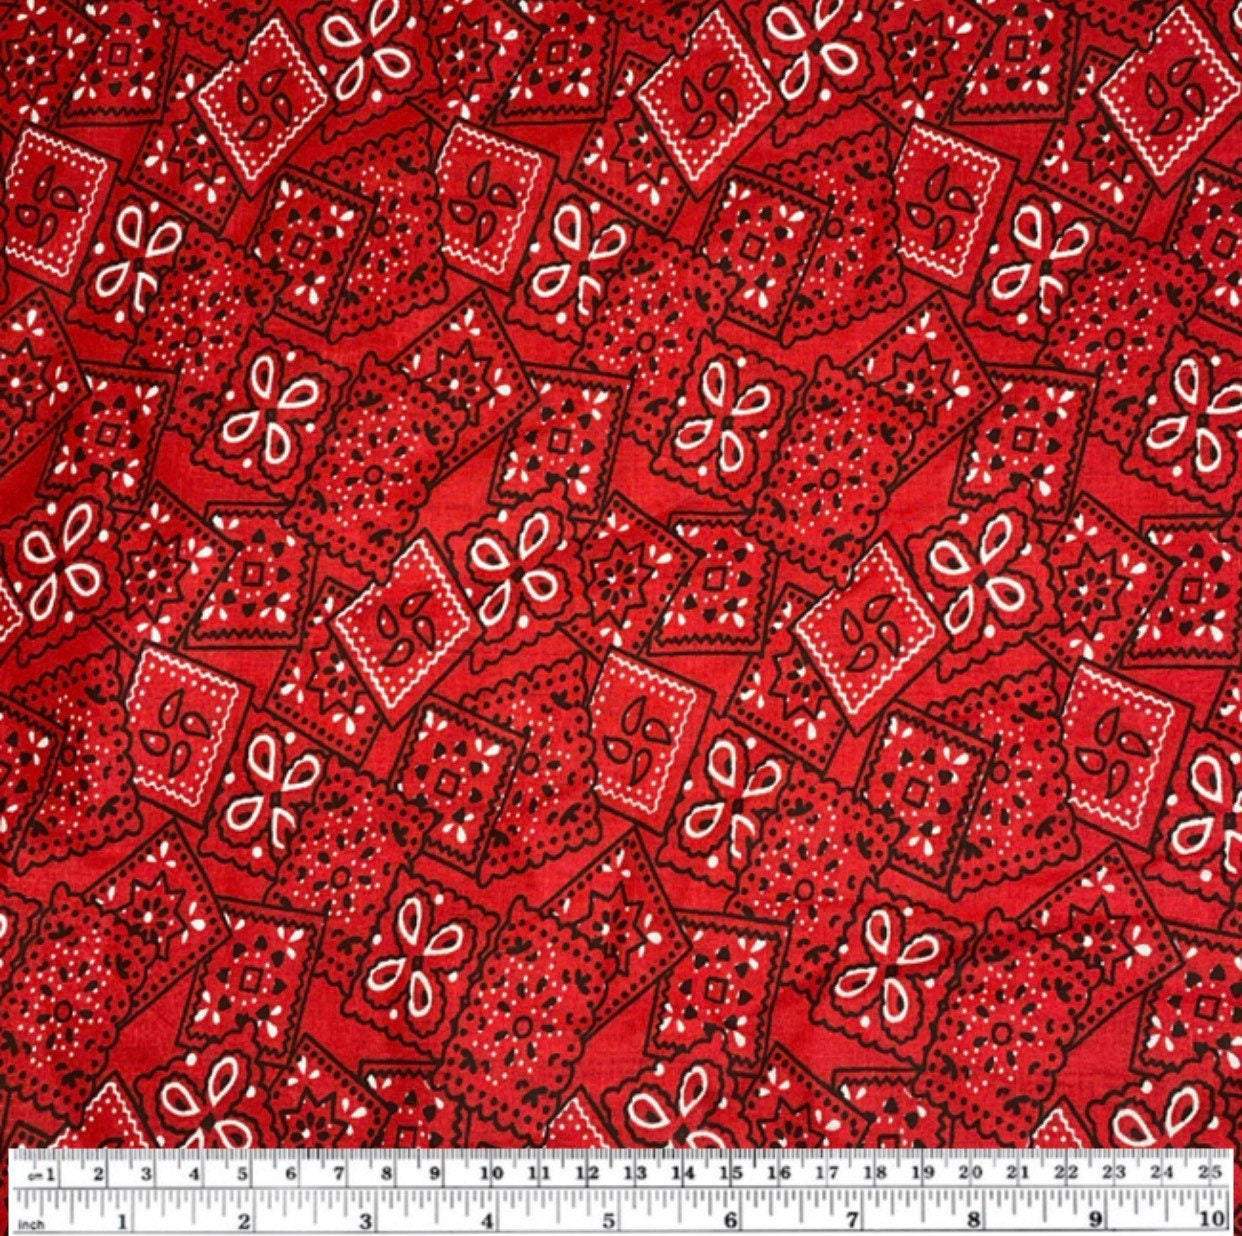 Quilting Cotton - Bandanna - 44” - Red